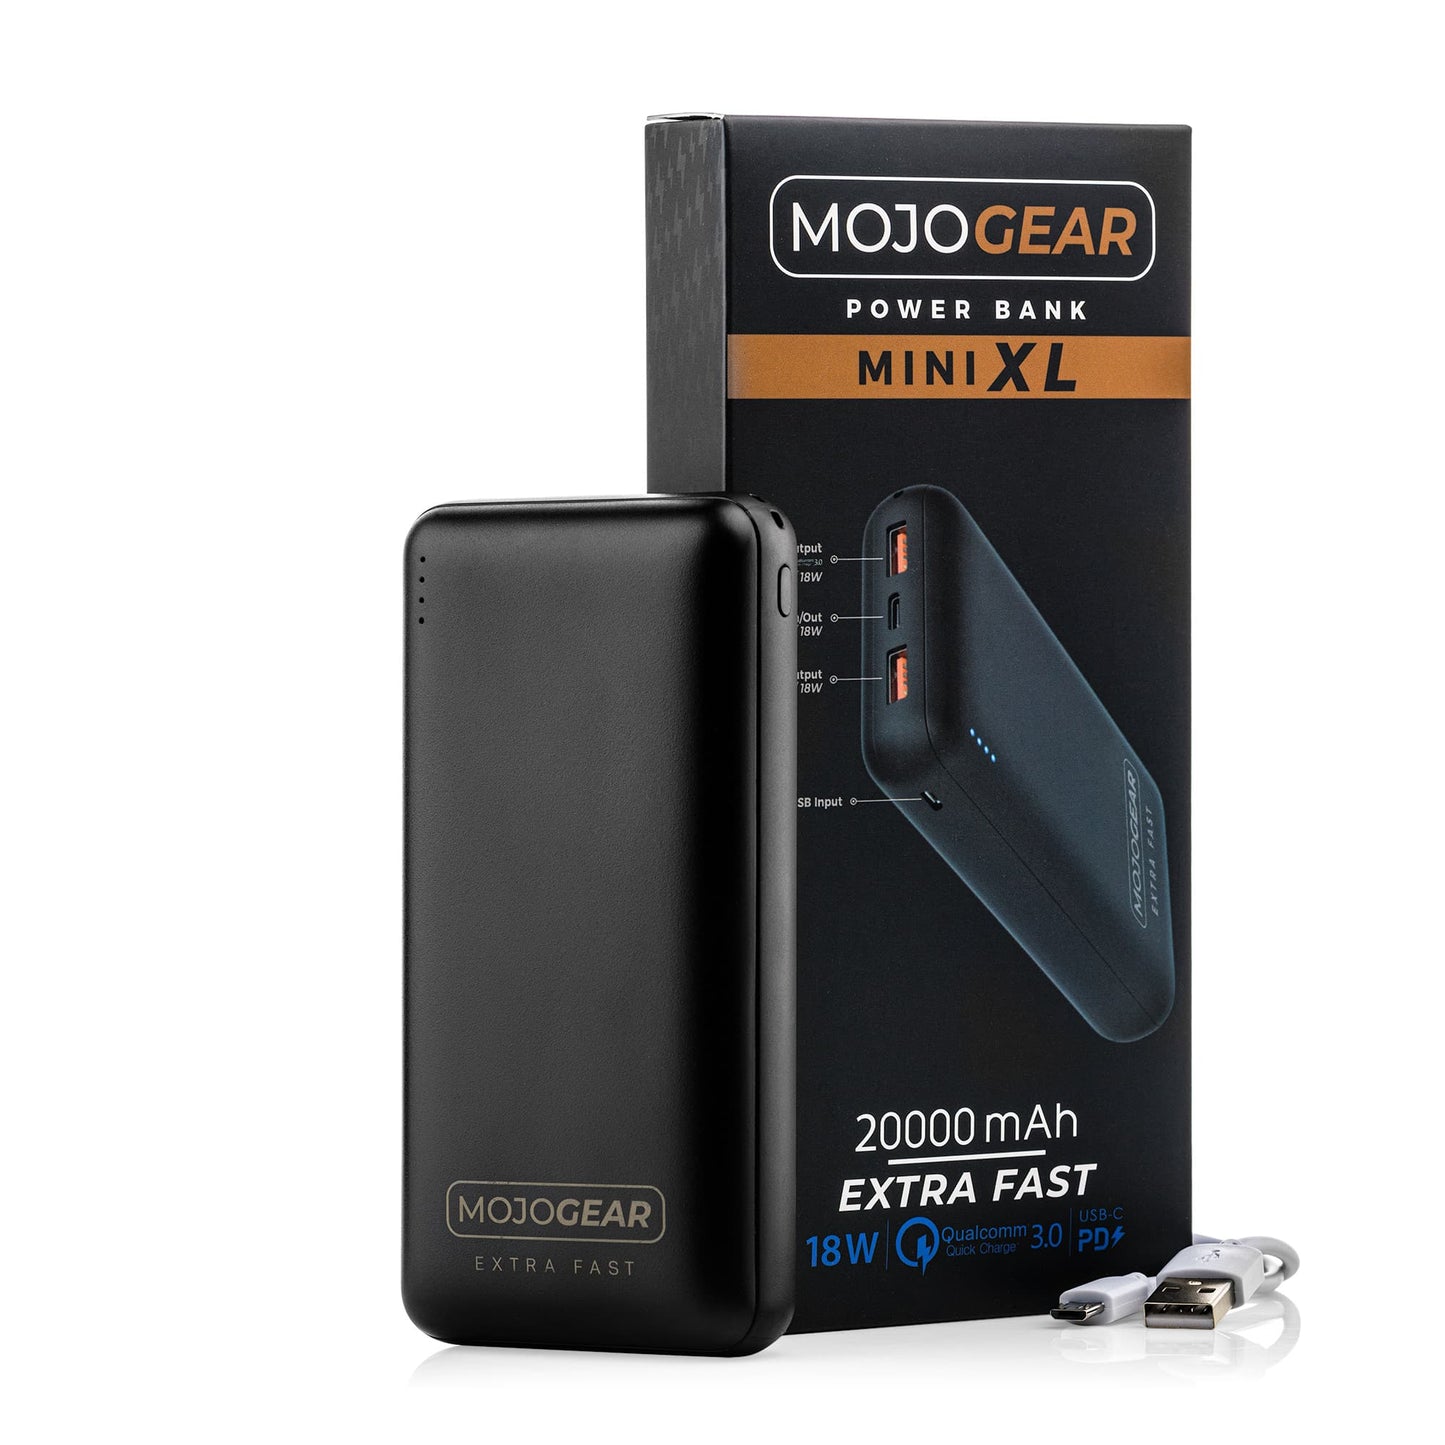 MOJOGEAR Bike Power Pack 20,000 mAh - with €5 support for Roparun